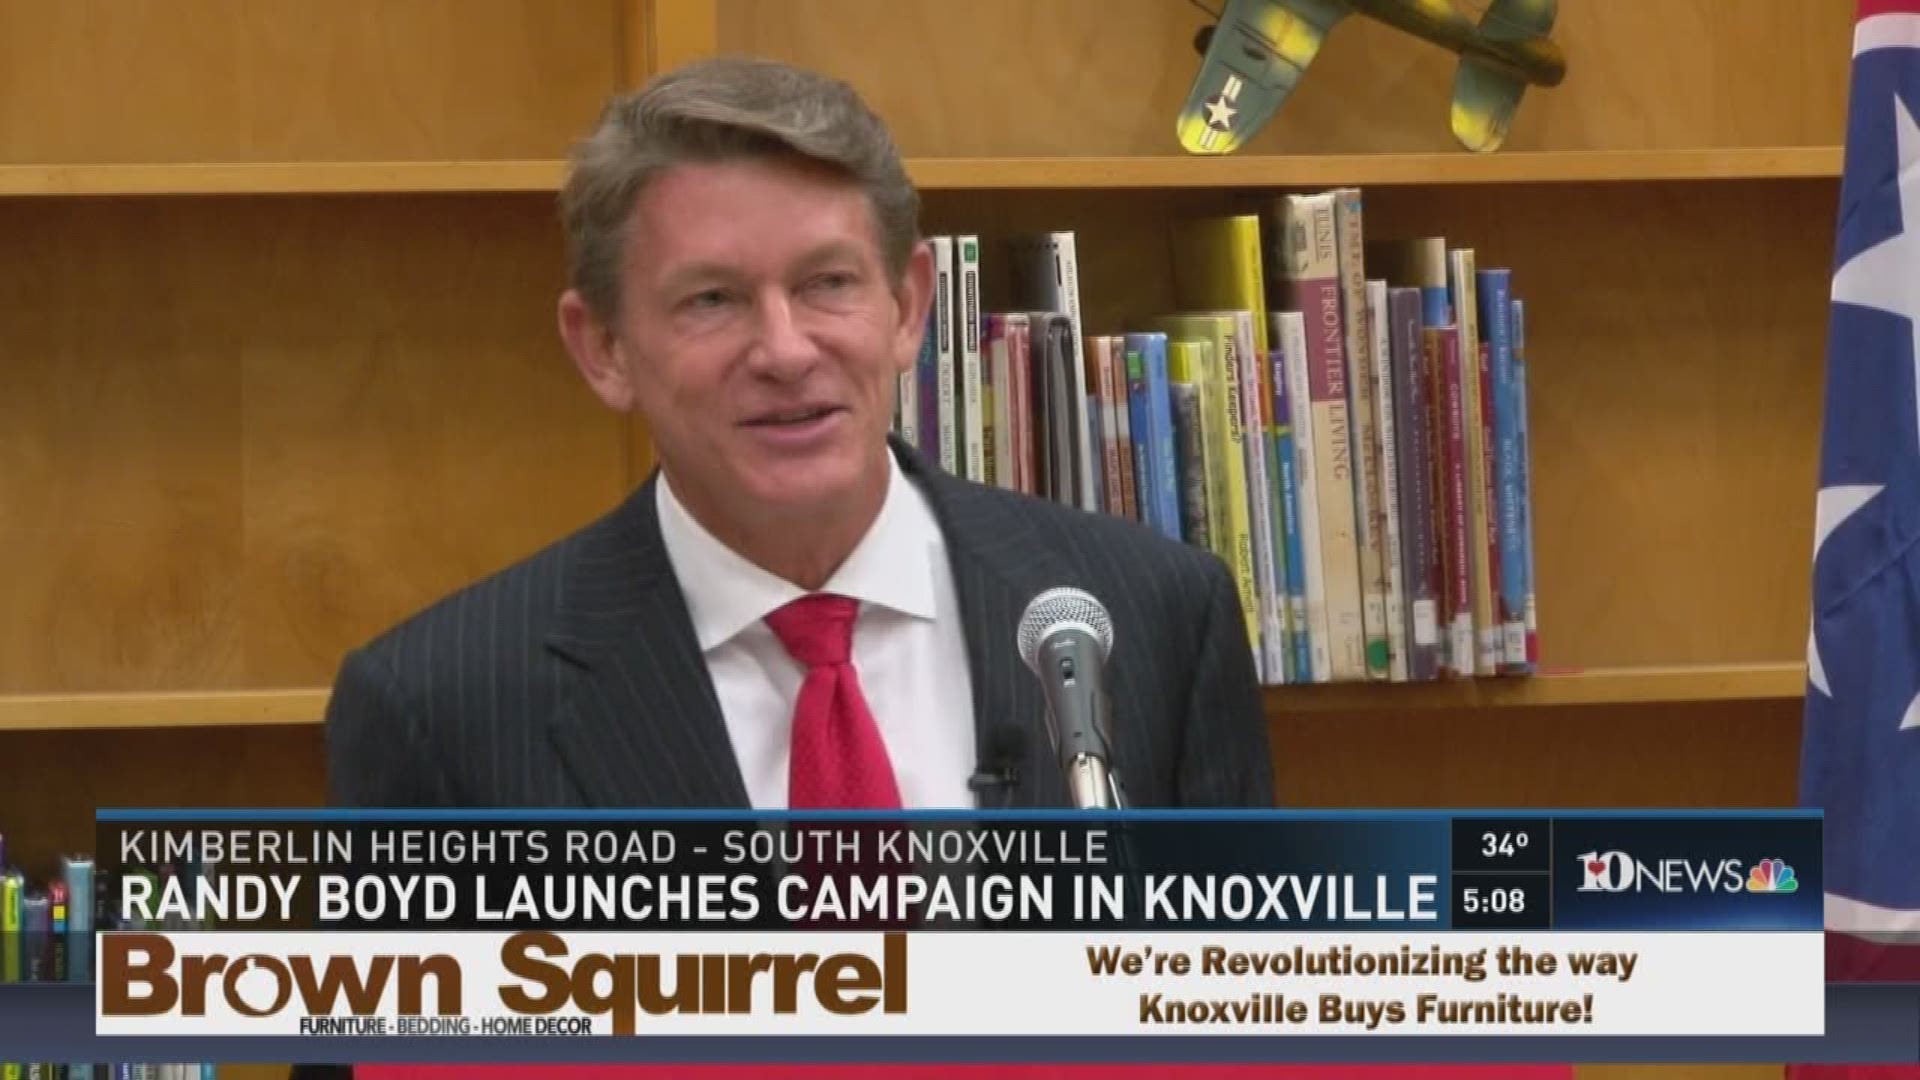 March 14, 2017: Knoxville businessman Randy Boyd launched his gubernatorial campaign in his hometown.